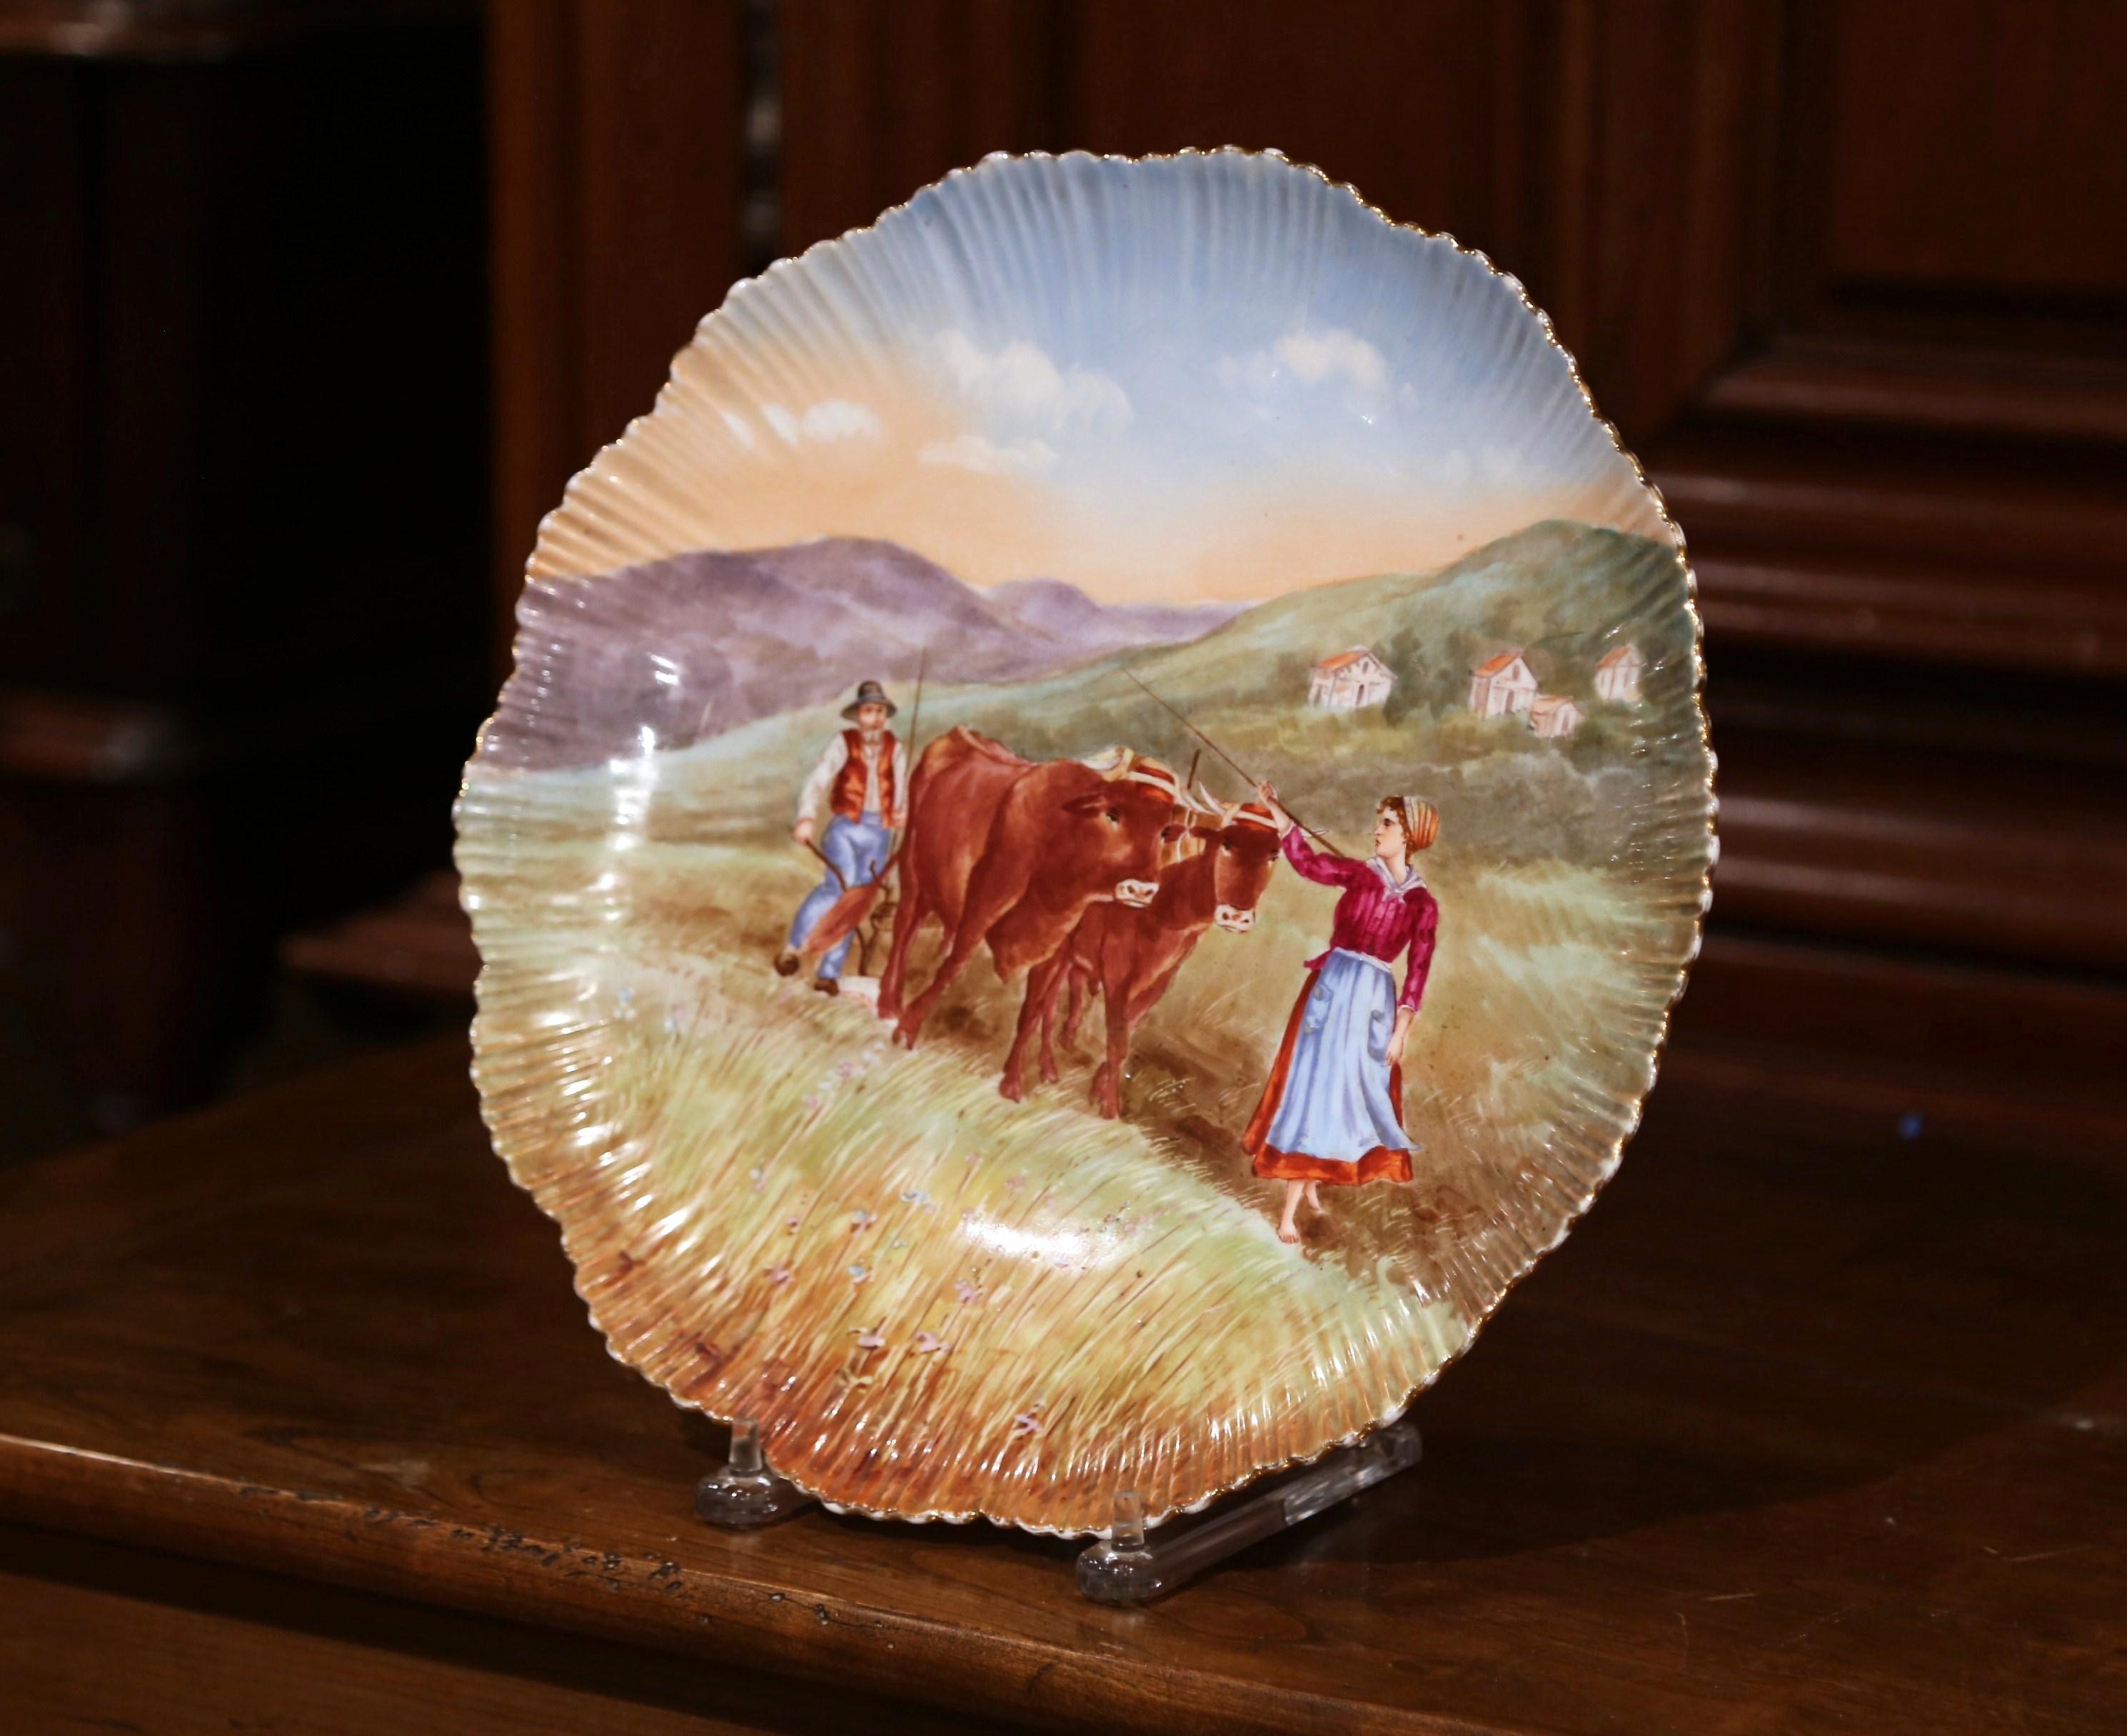 This large antique platter was sculpted in northern France, circa 1880. The hand painted landscape scene features a peasant couple plowing a field with a pair of cows pulling. The decorative porcelain plate has a scalloped edge and a rich palette of